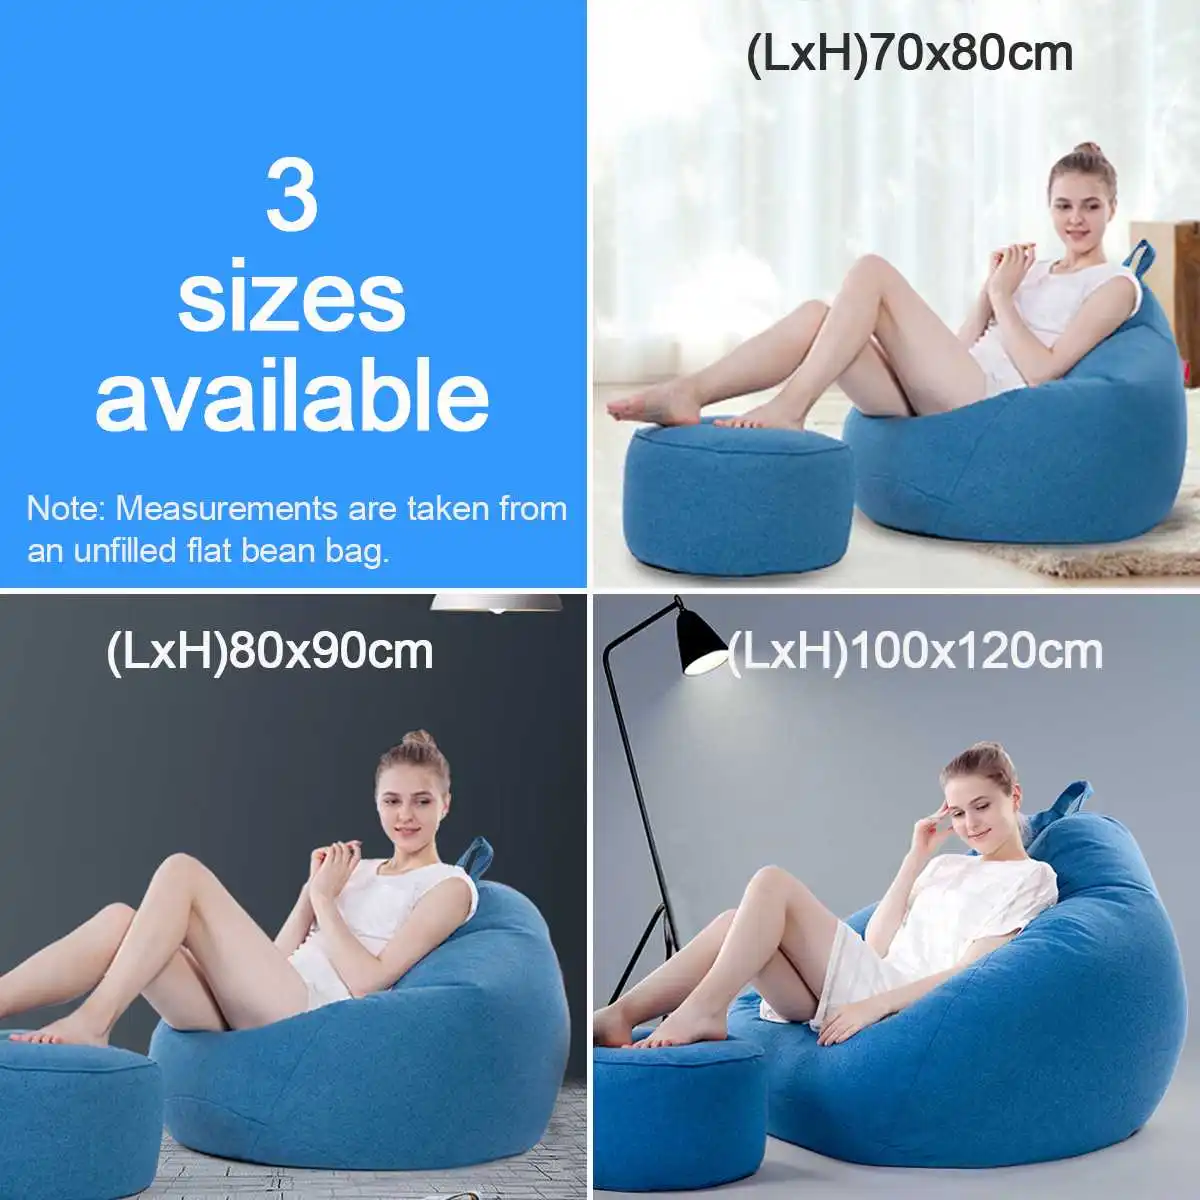 Lazy Beanbag Sofas Without Linen Cloth Lounger Seat Bean Bag Sofa Cover Chairs Pouf Puff Couch Tatami Living Room Furniture Bean Bag Sofas Aliexpress